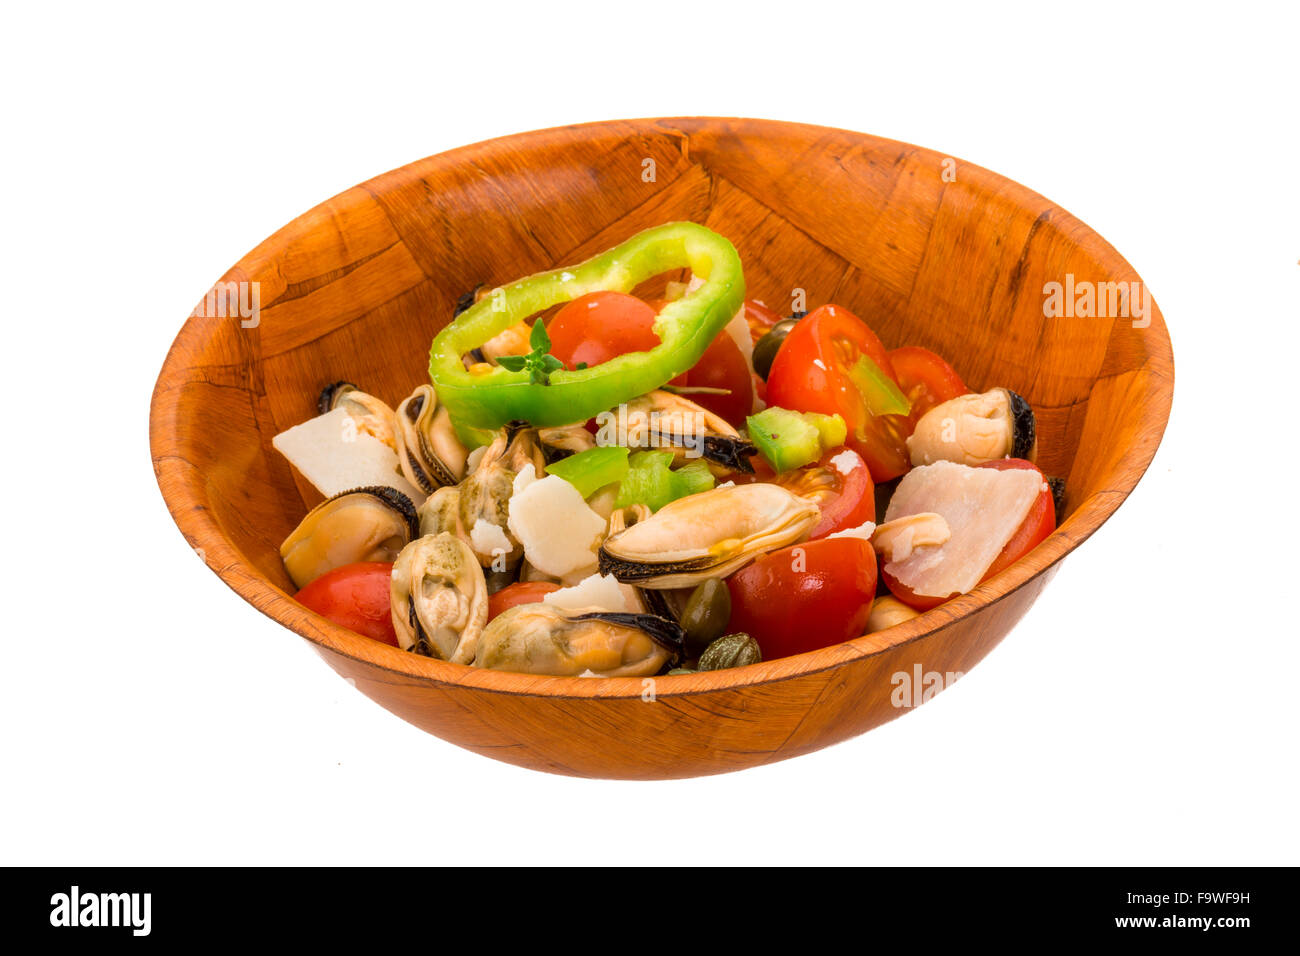 Mussells salad with tomato and cheese Stock Photo